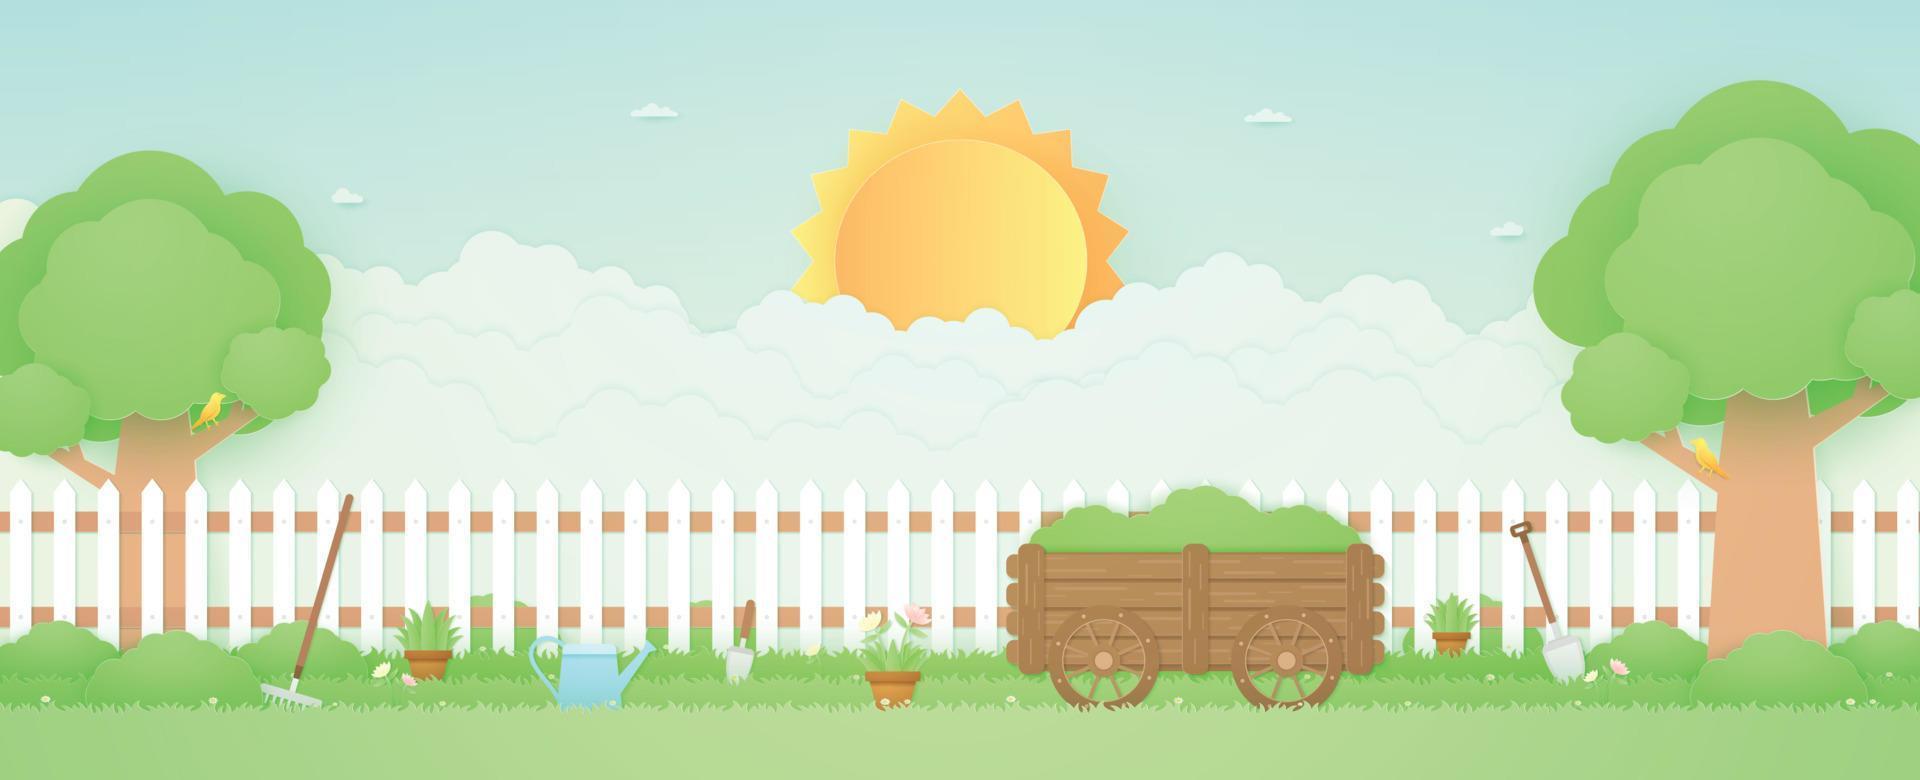 Spring Time, landscape, garden with wooden cart, trees, plant pots, beautiful flowers, farm stuff on grass and fence, bird on the branch, bright sun and cloud, paper art style vector